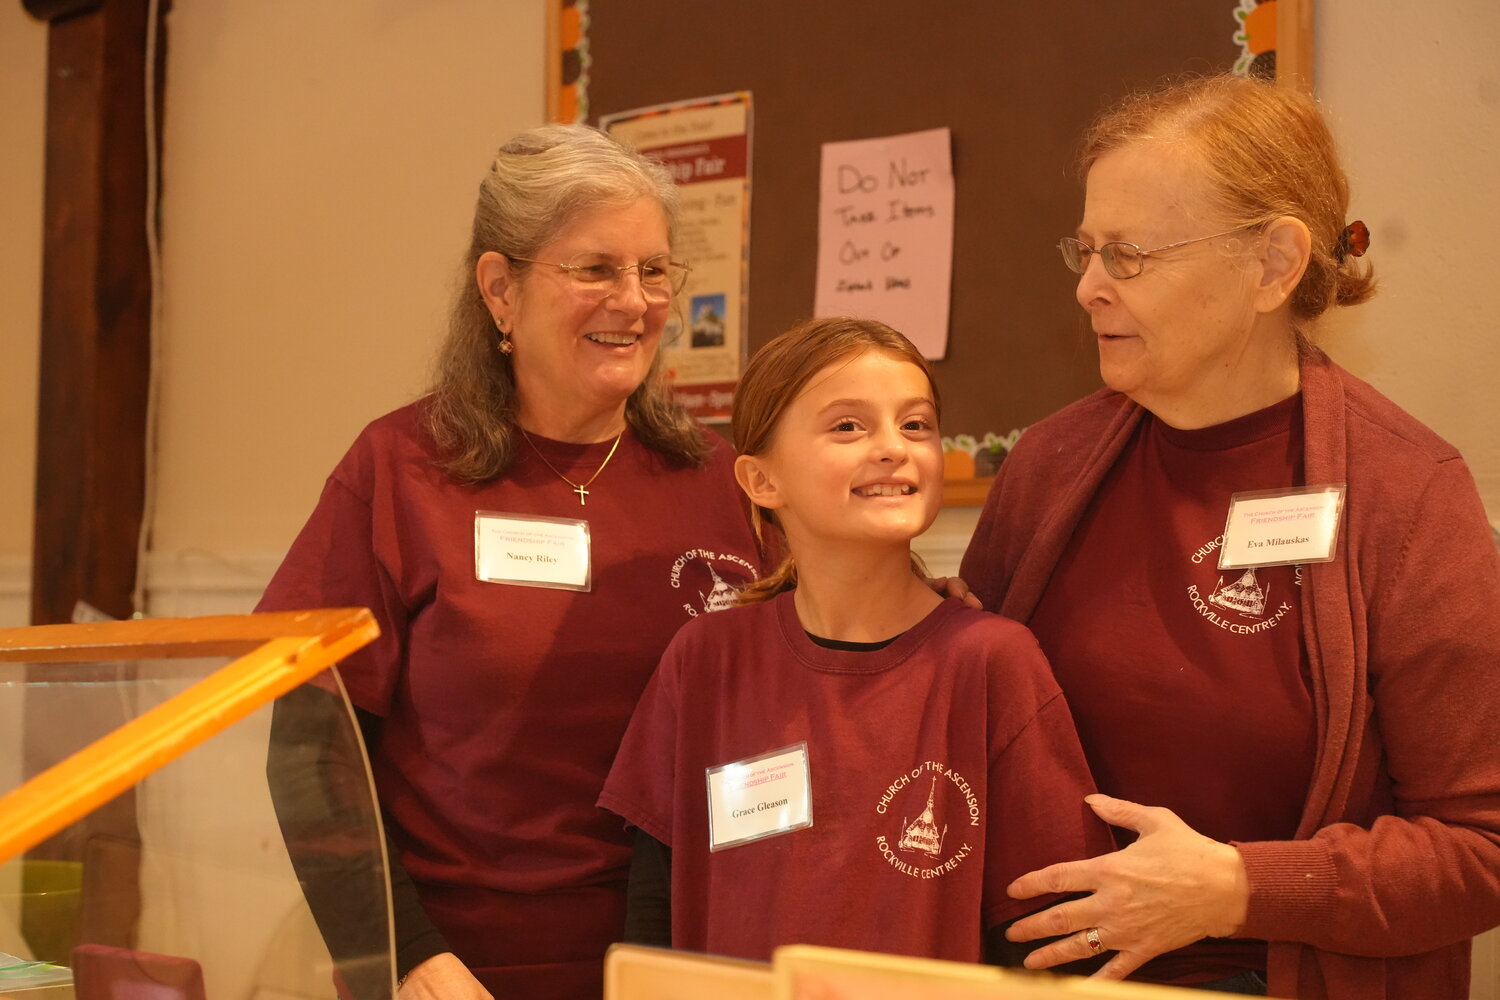 Nancy Riley, left, Grace Gleason, and Eva Milauskas participate in the Church of the Ascension’s annual Friendship Fair.